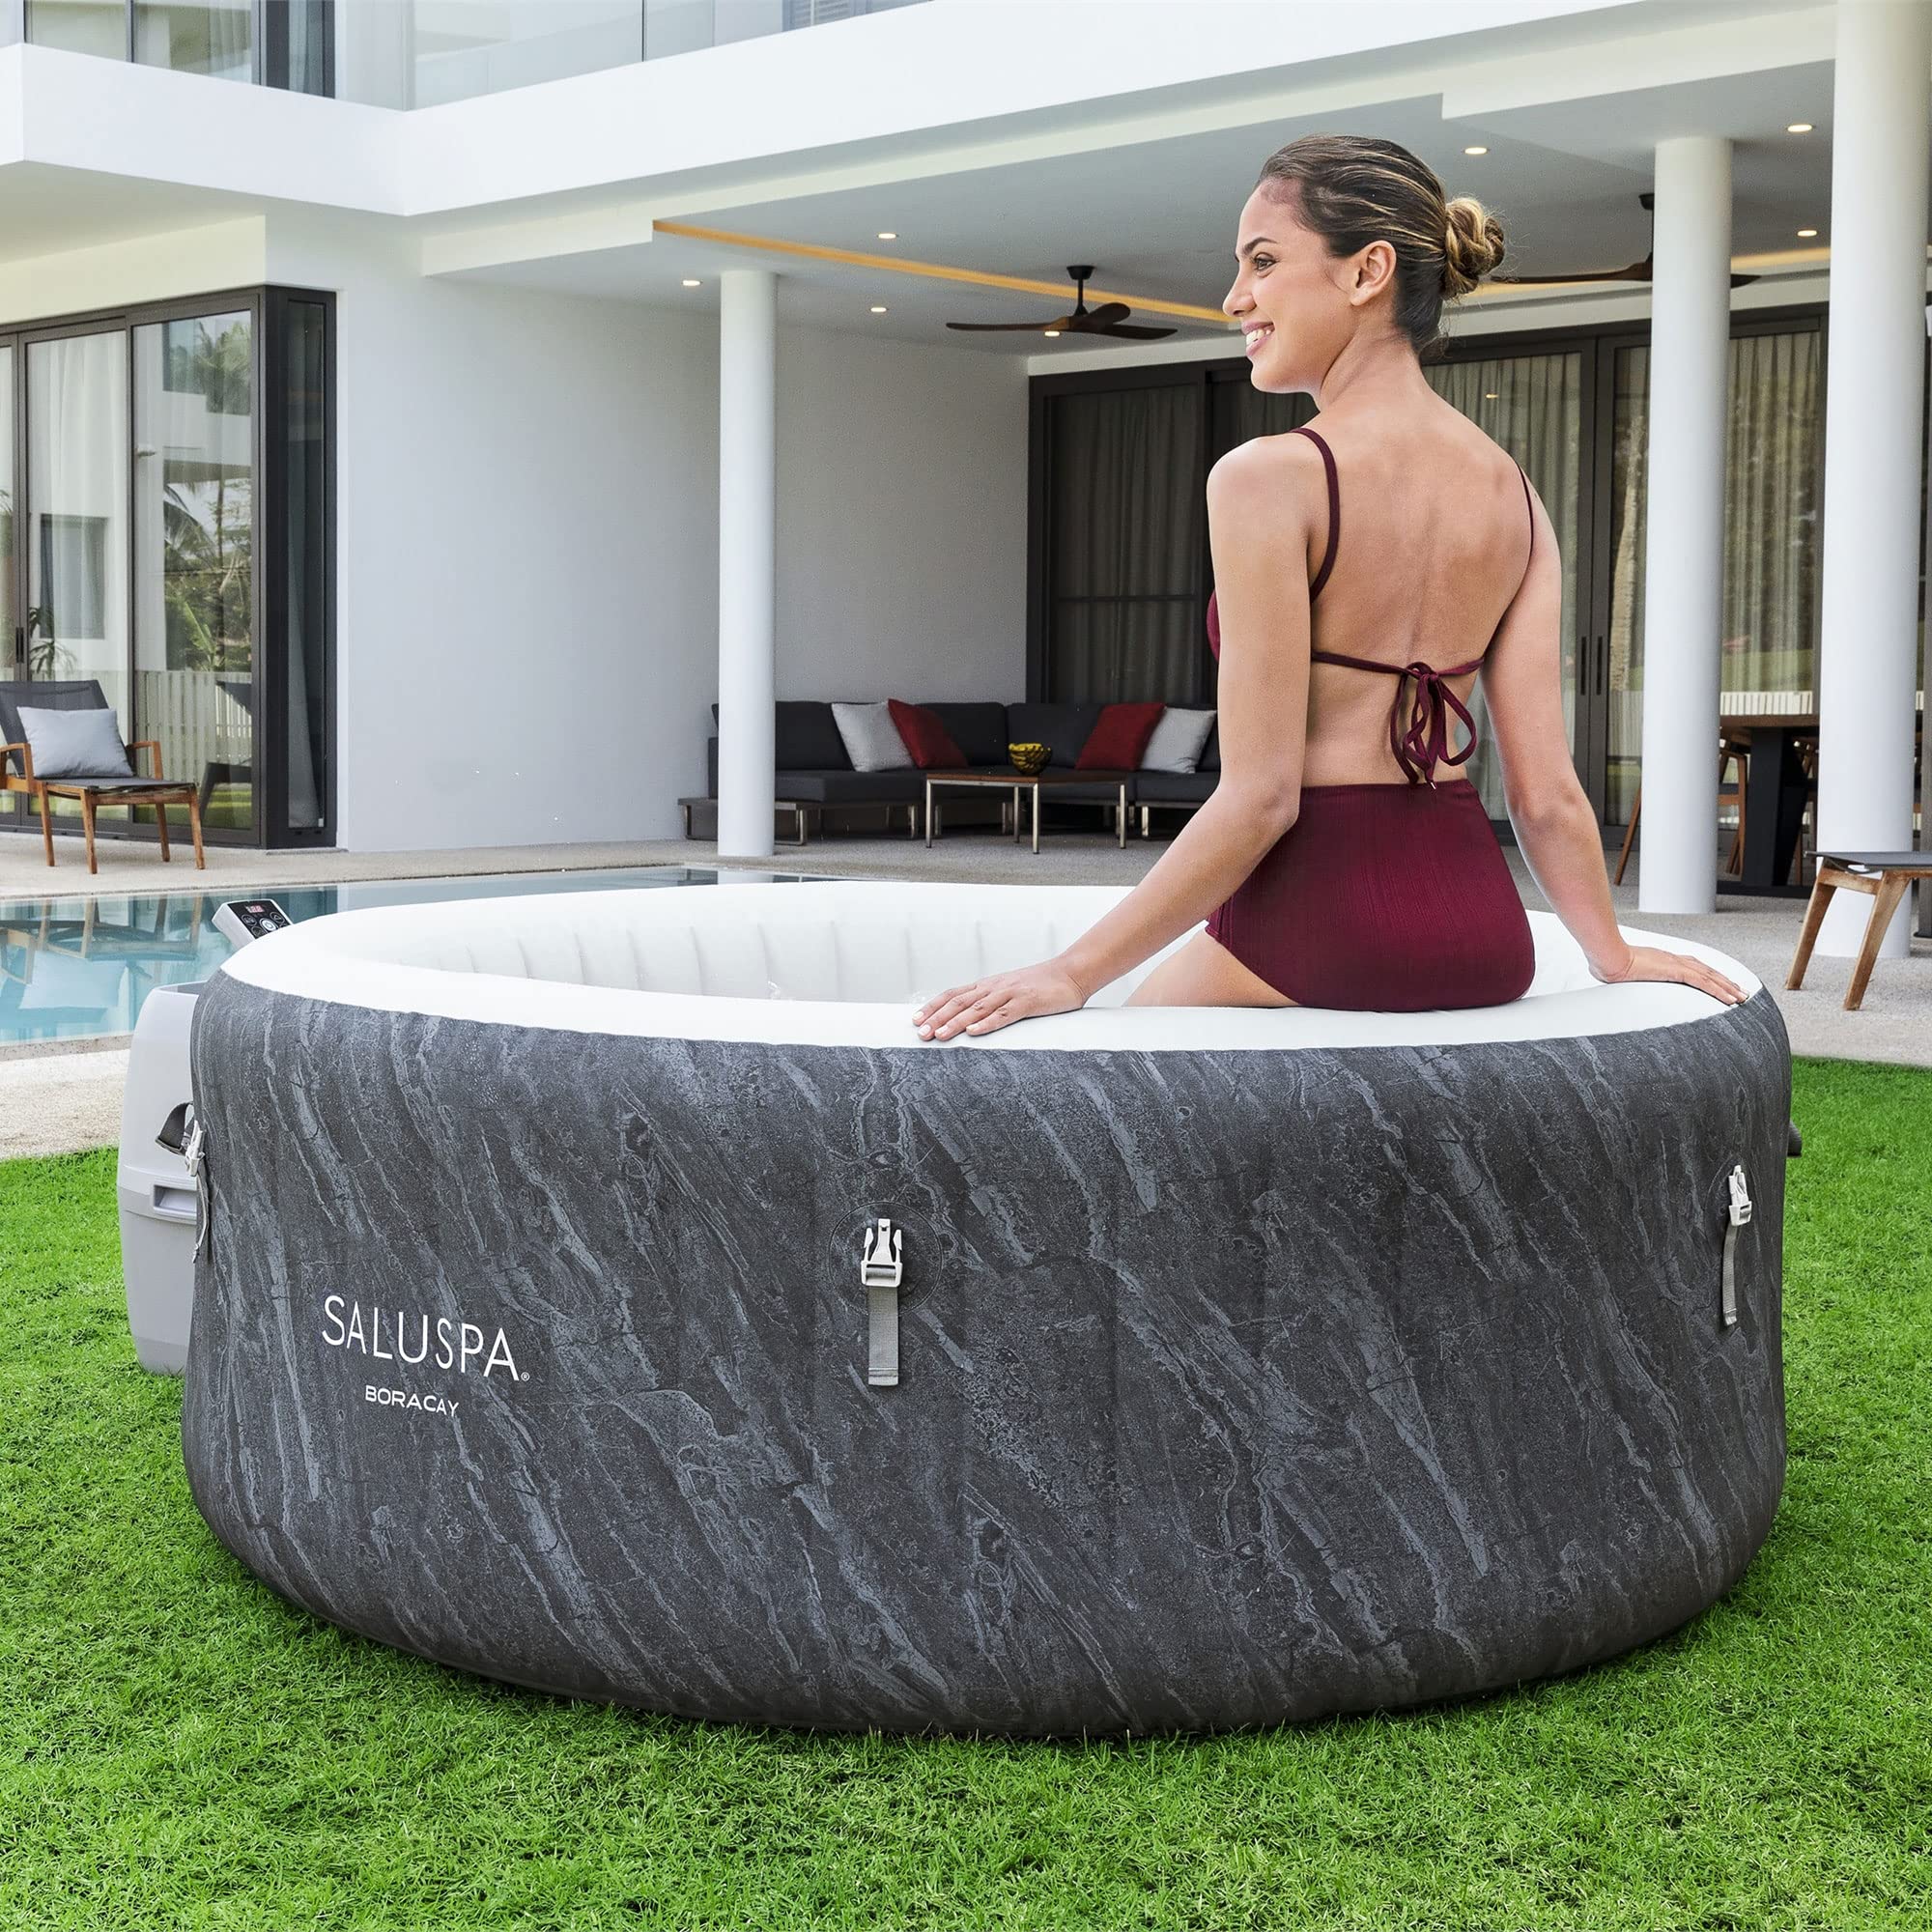 Bestway SaluSpa Boracay AirJet 2 to 4 Person Inflatable Hot Tub Round Portable Outdoor Spa 120 Soothing Jets with Cover, Gray